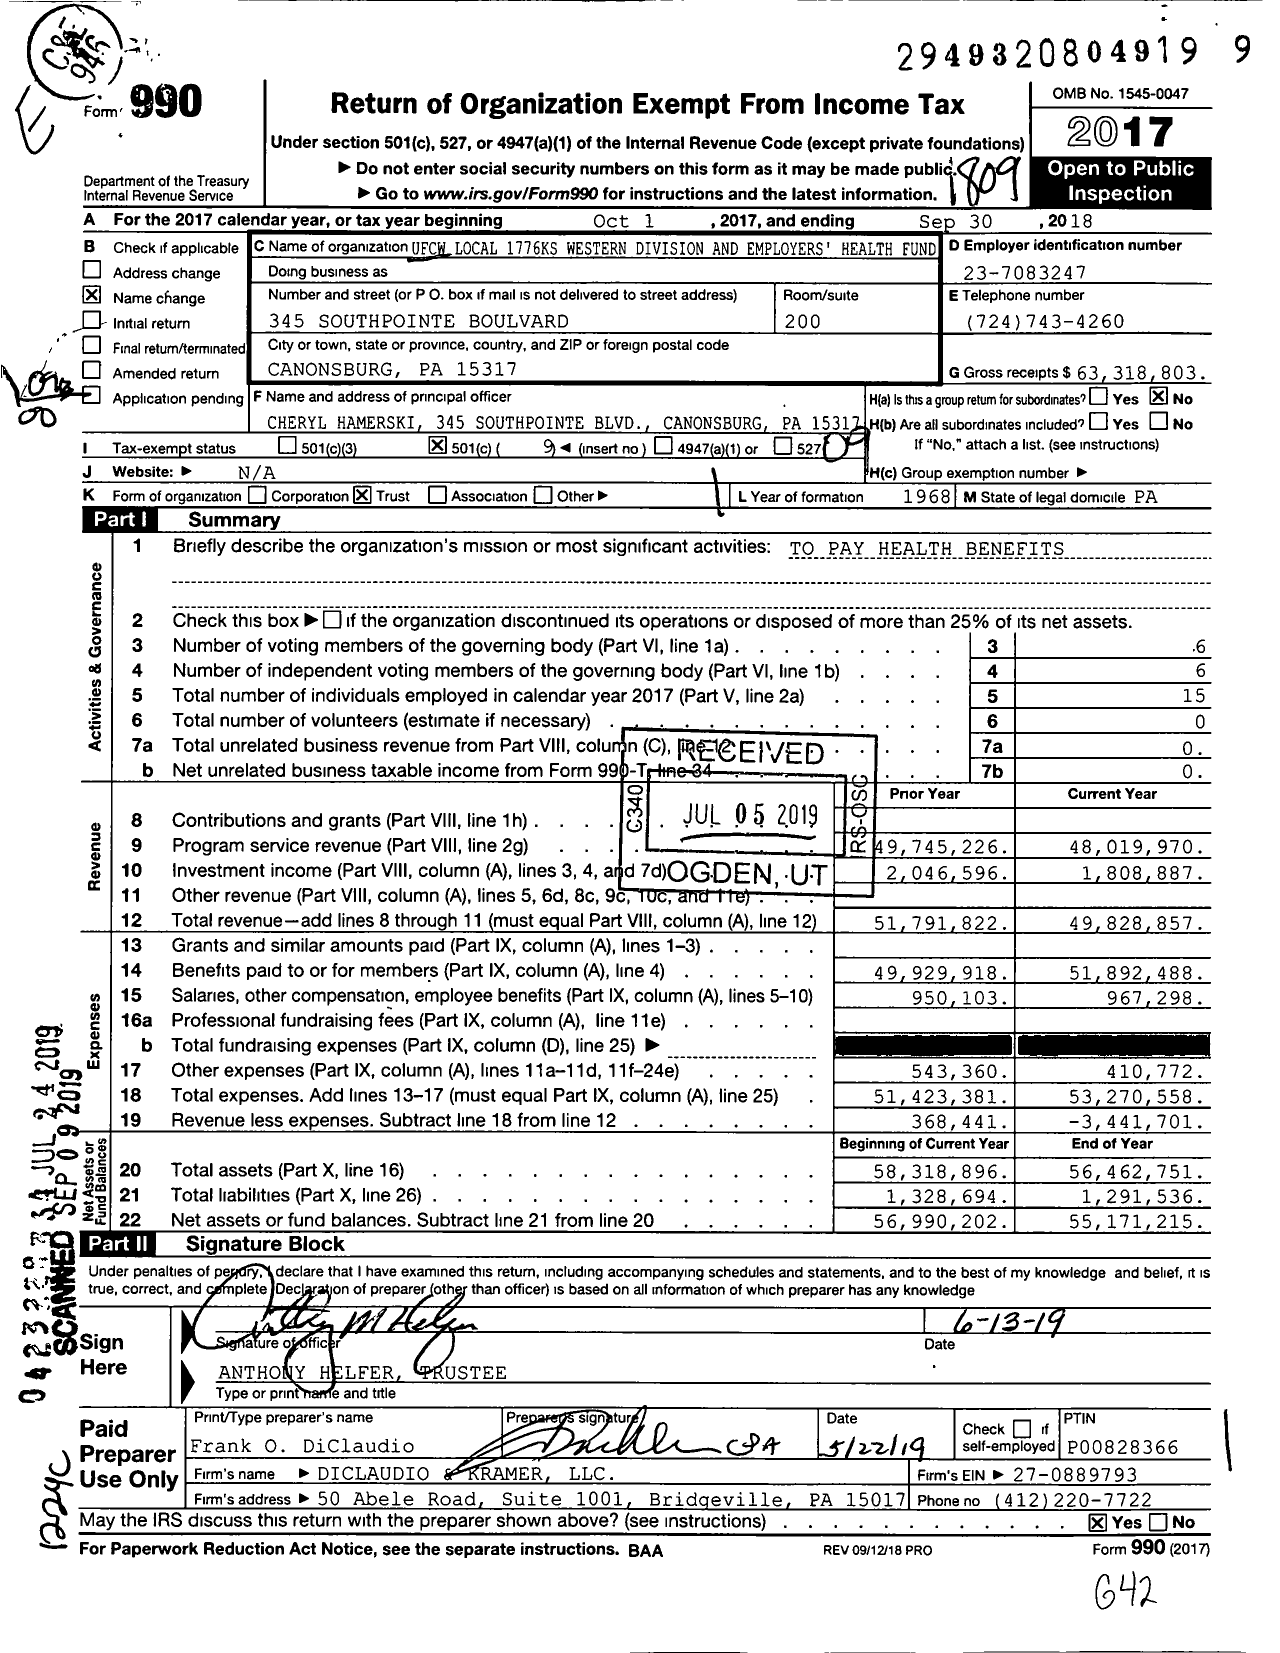 Image of first page of 2017 Form 990O for Ufcw Local 1776ks Western Division and Employers' Health Fund